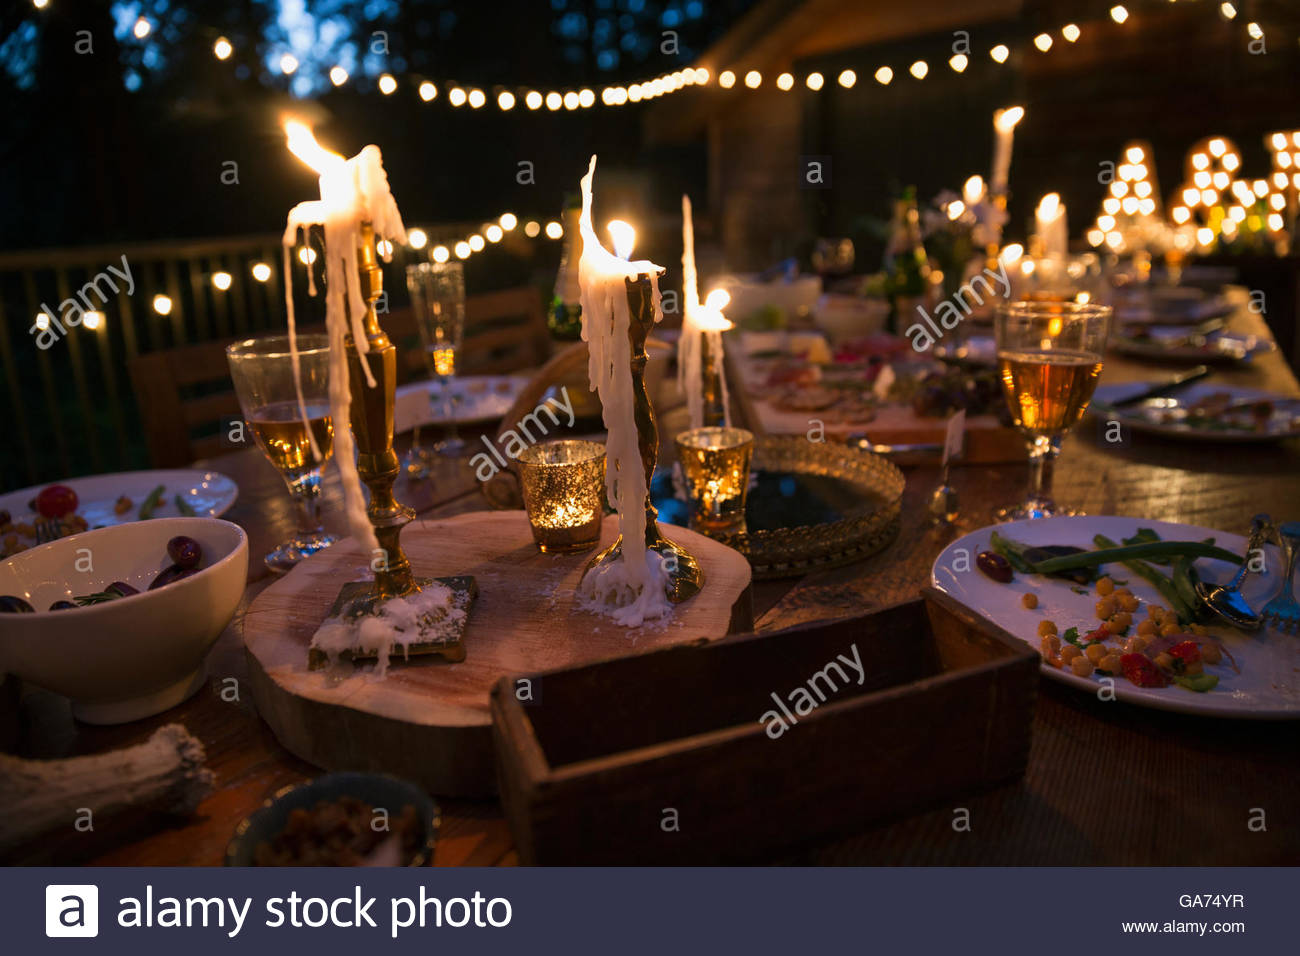 Melting Candles And Food On Wedding Reception Table Stock Photo